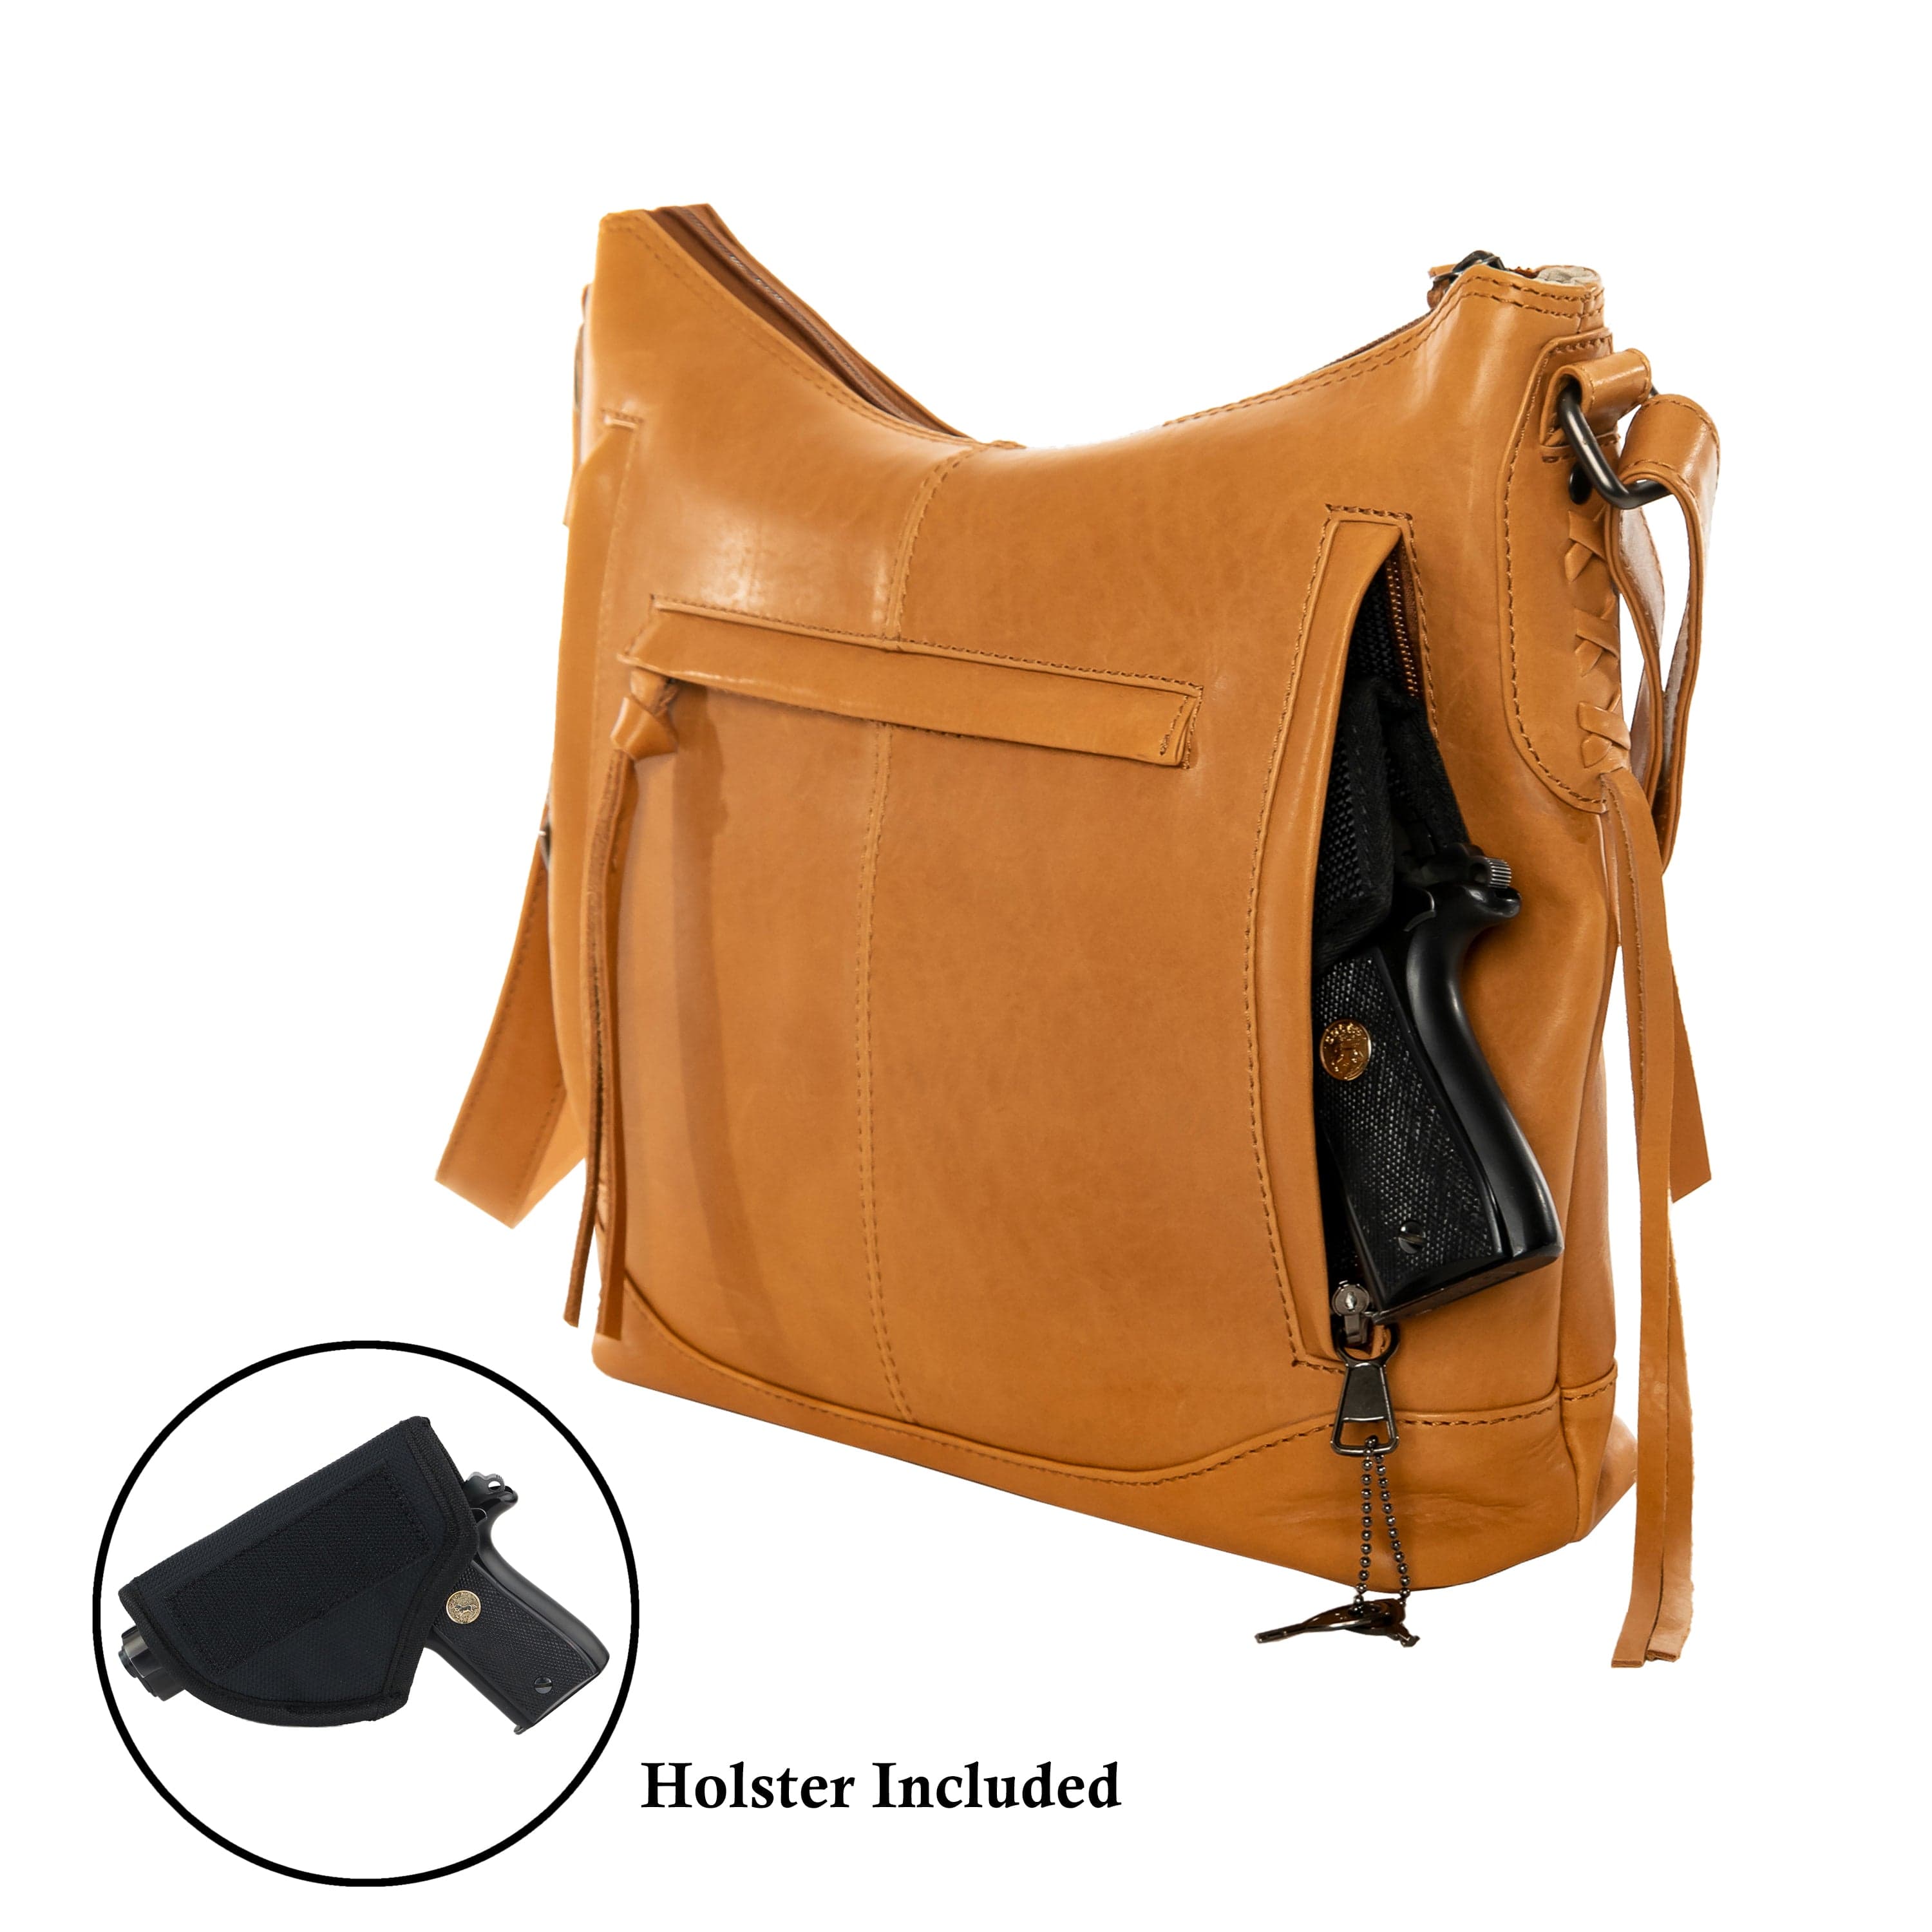 Concealed Carry Blake Scooped Leather Crossbody -  Lady Conceal -  Concealed Carry Purse -  black crossbody purse designer -  black owned purse designers -  crossbody bag for concealed gun carry -  concealed carry gun bags -  concealed carry crossbody bag -  concealed carry purse crossbody -  Gift for gun owners -  Women Gun Bag -  most popular crossbody bag -  crossbody handgun bag -  crossbody bags for everyday use